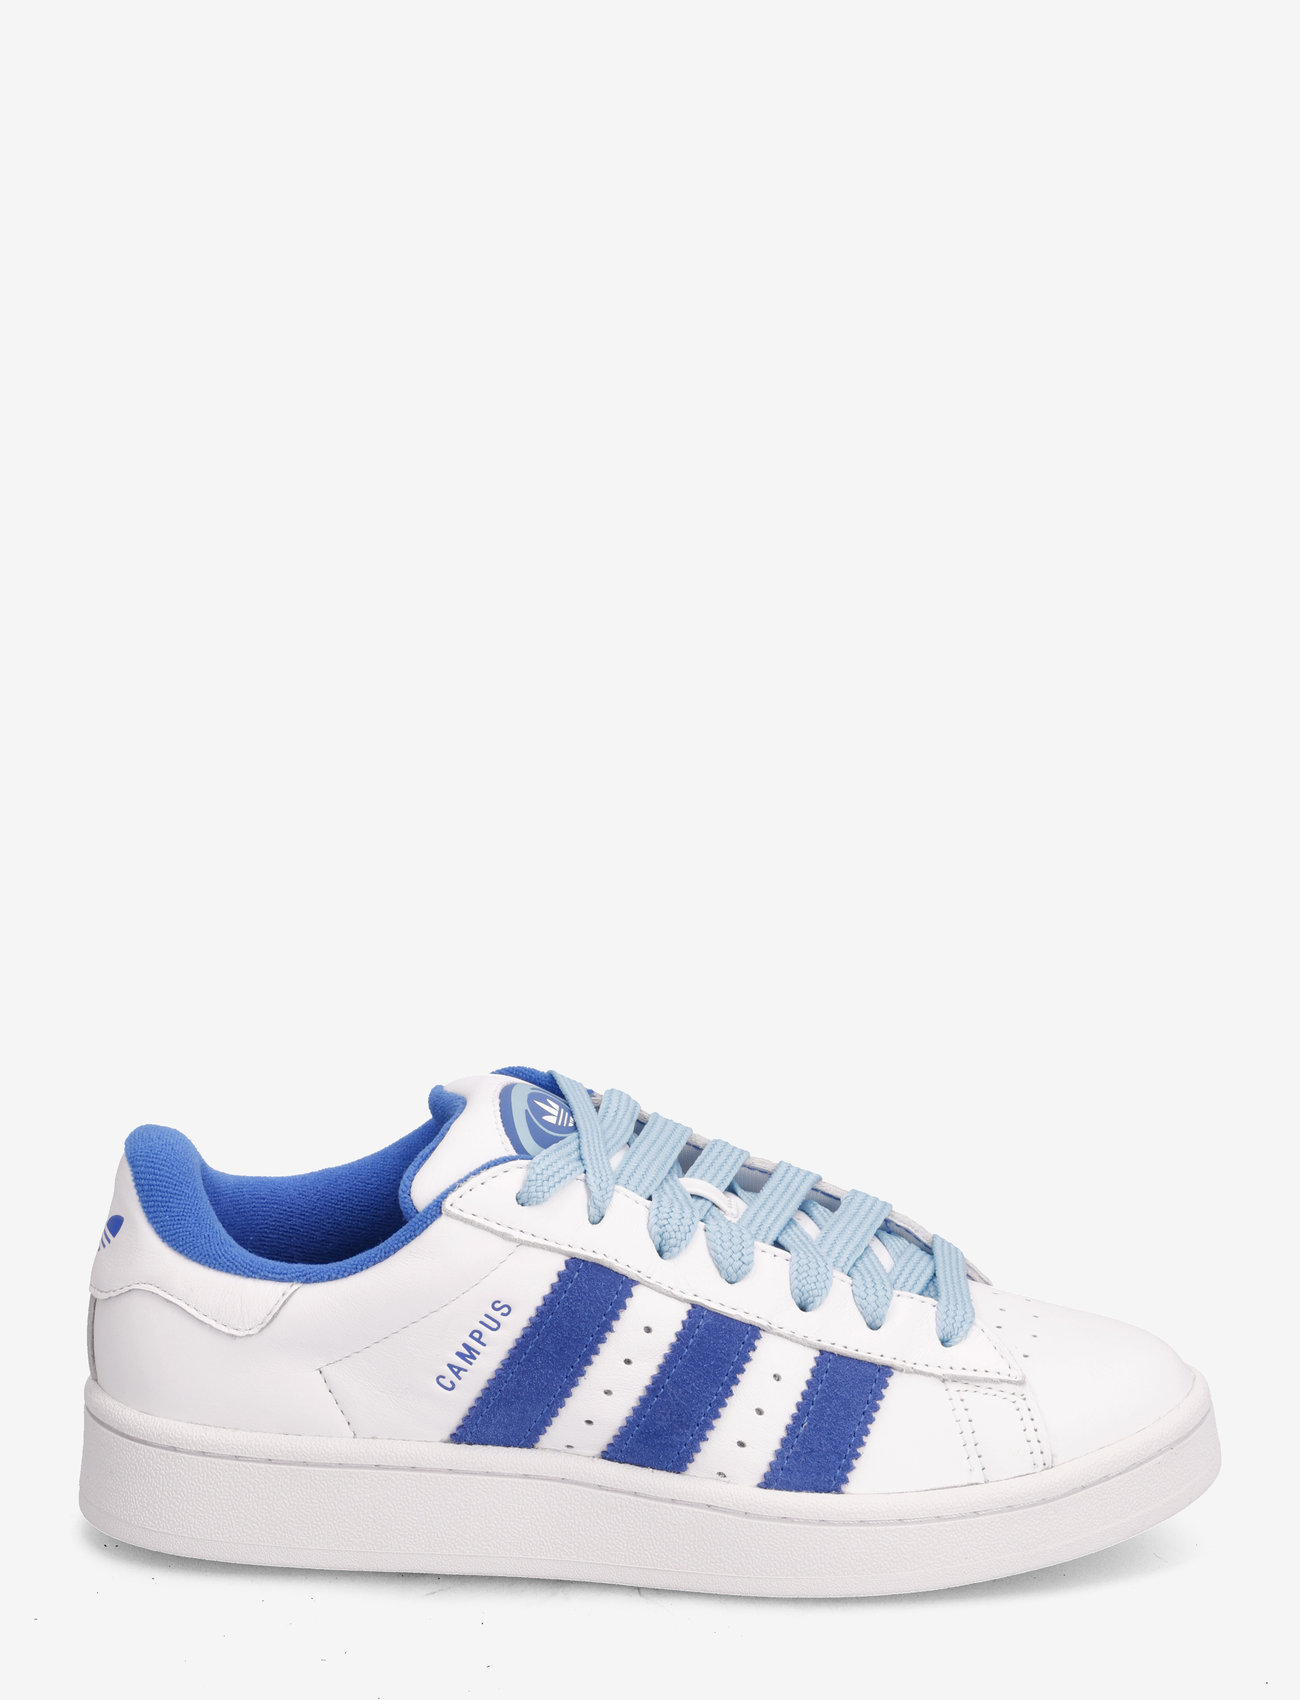 adidas Originals - CAMPUS 00s - lage sneakers - ftwwht/blue/brblue - 1